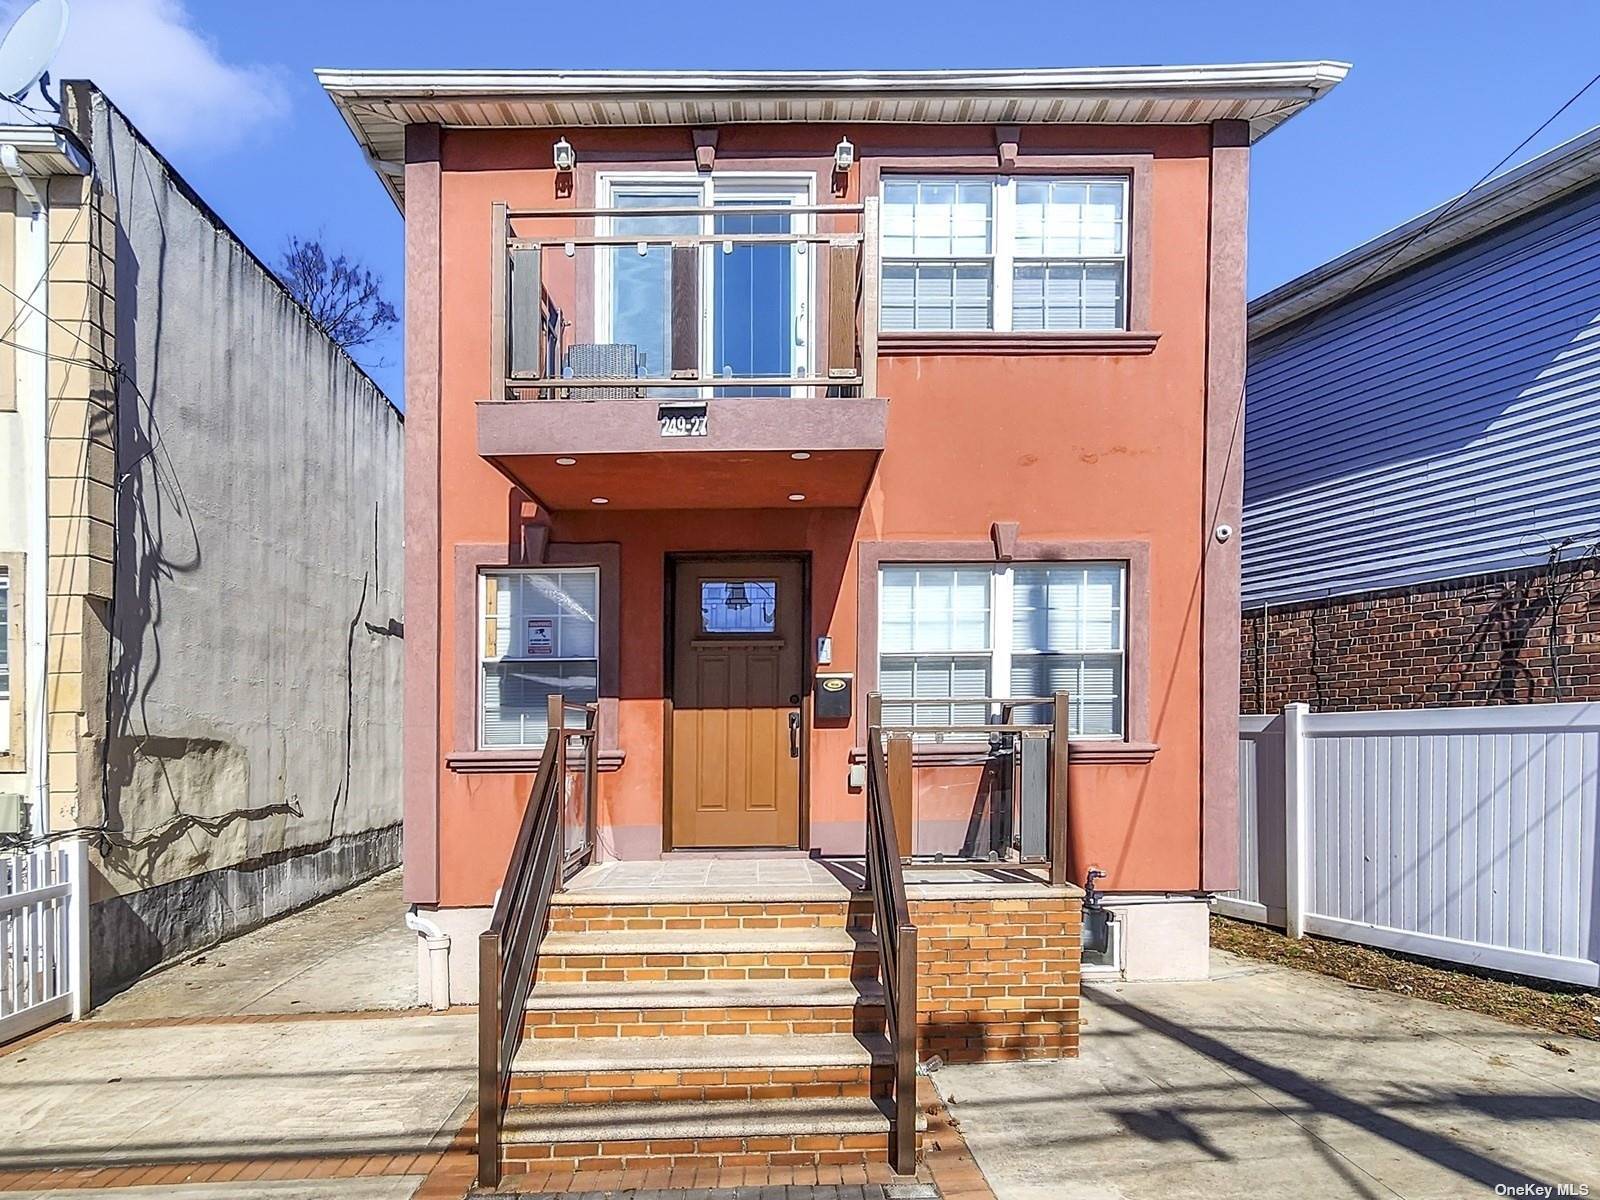 Recently renovated detached house in Bellerose boasts a prime location within School District 26.